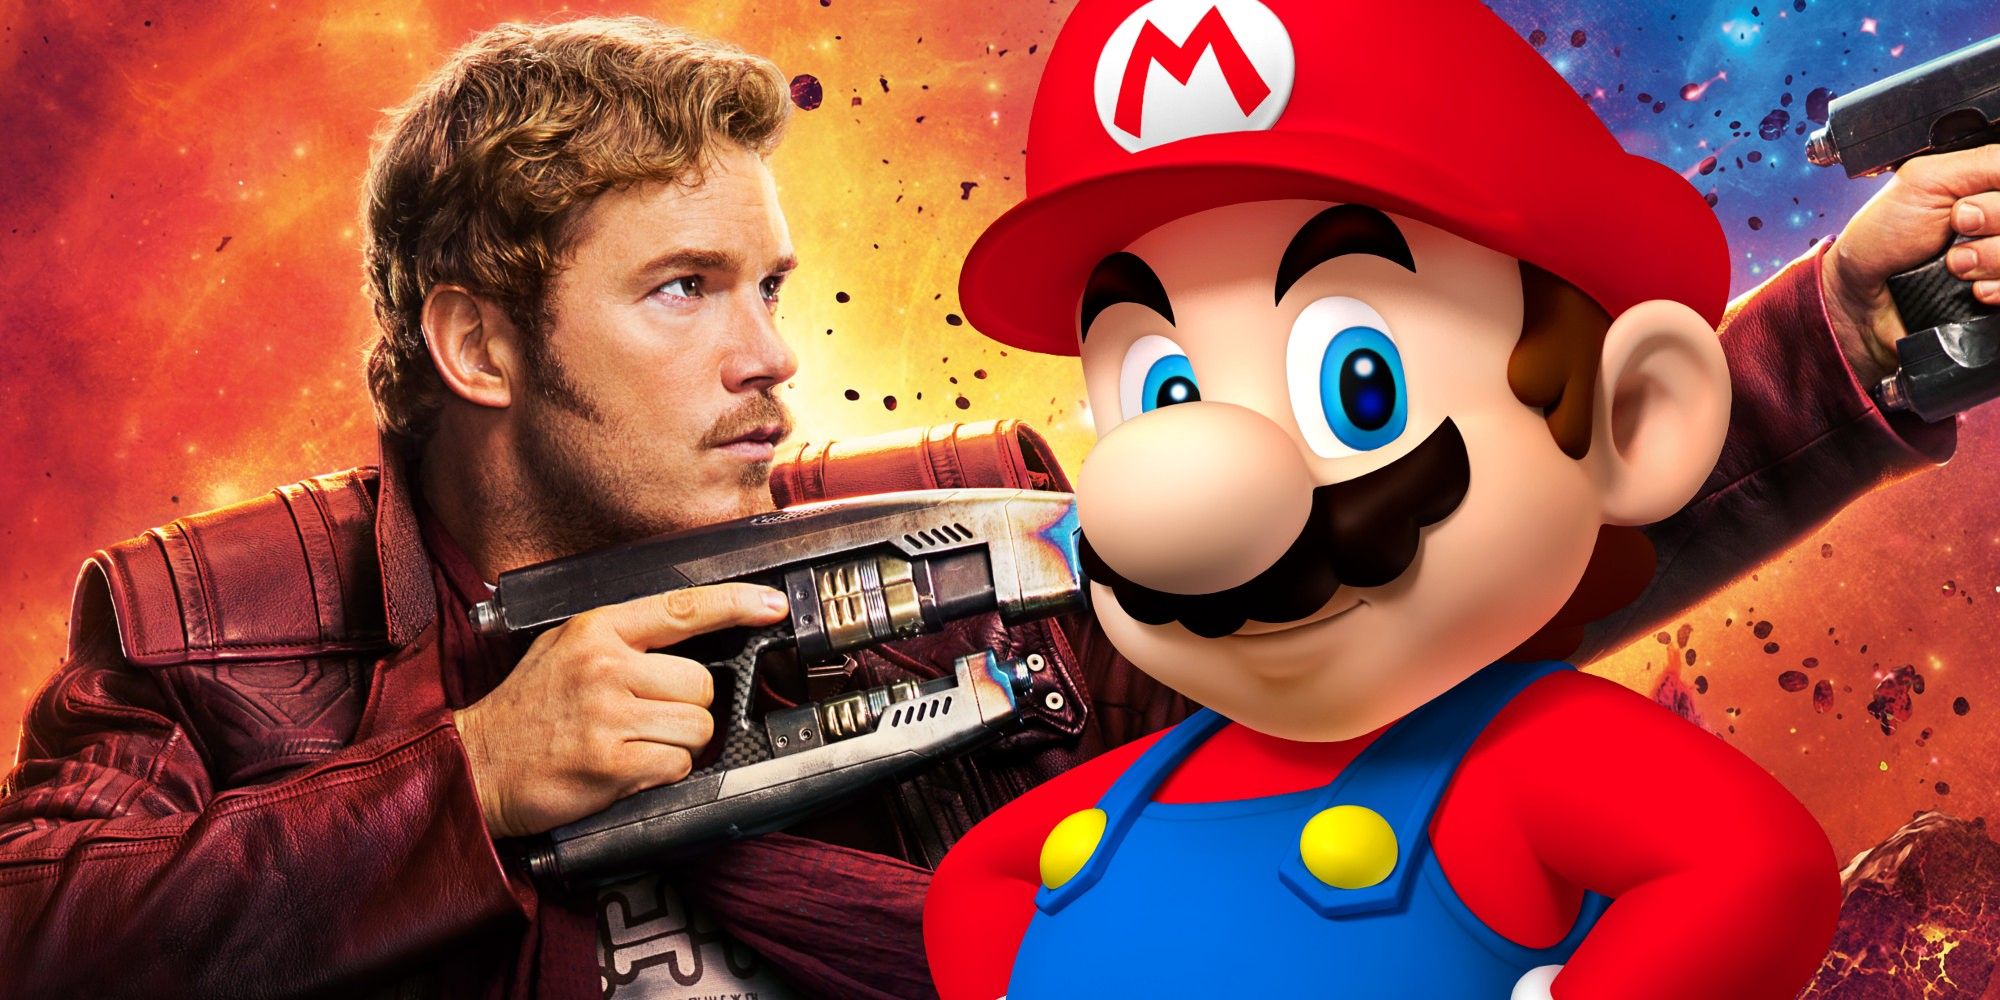 Here's When The Super Mario Bros. With Chris Pratt Will Release